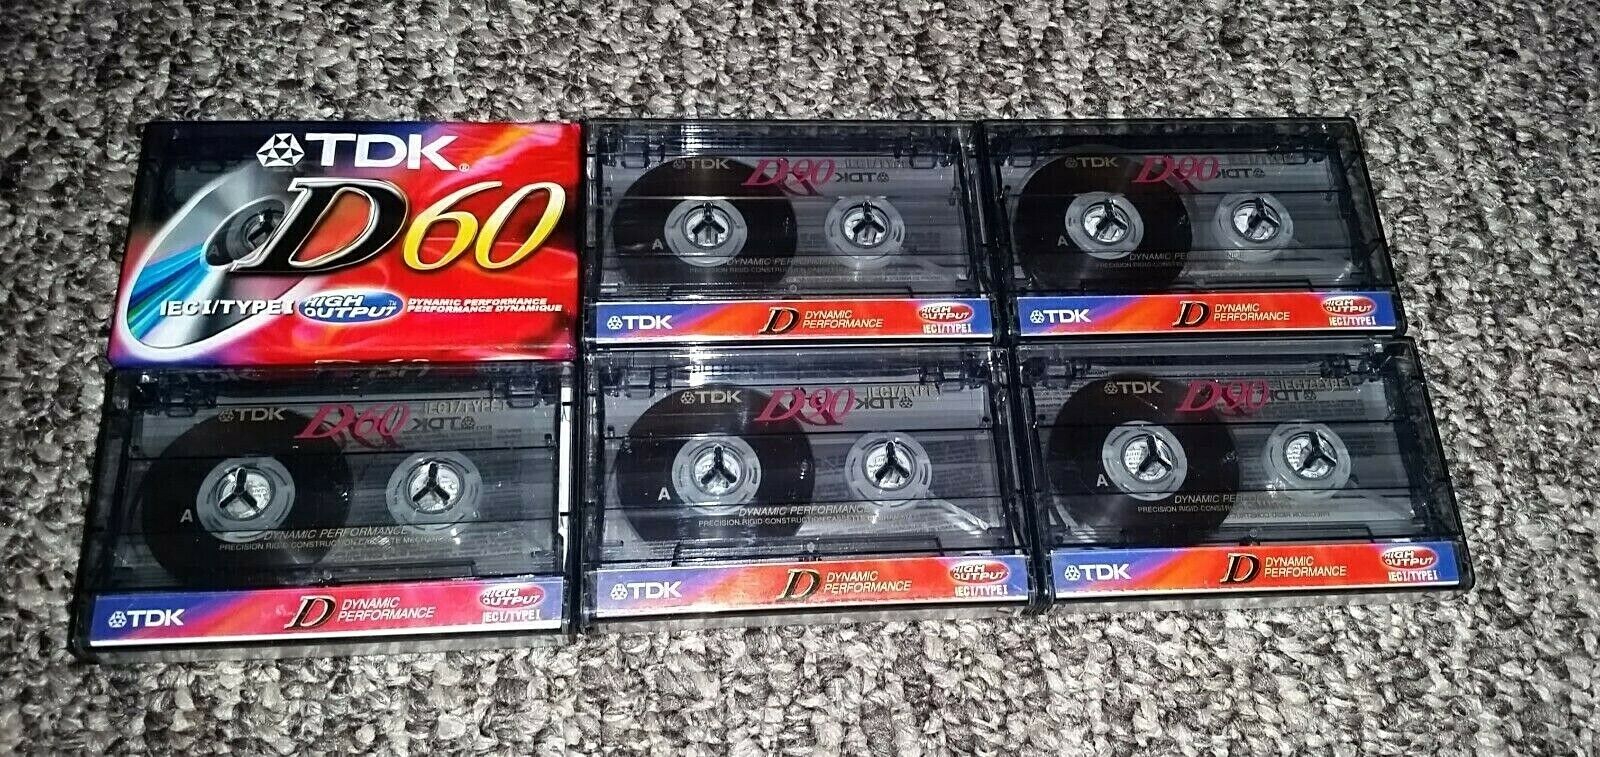 1 Sealed TDK Popular shop is the Max 69% OFF lowest price challenge D60 and 5 Never D90 Music Used Audio Cassette Tape Tapes